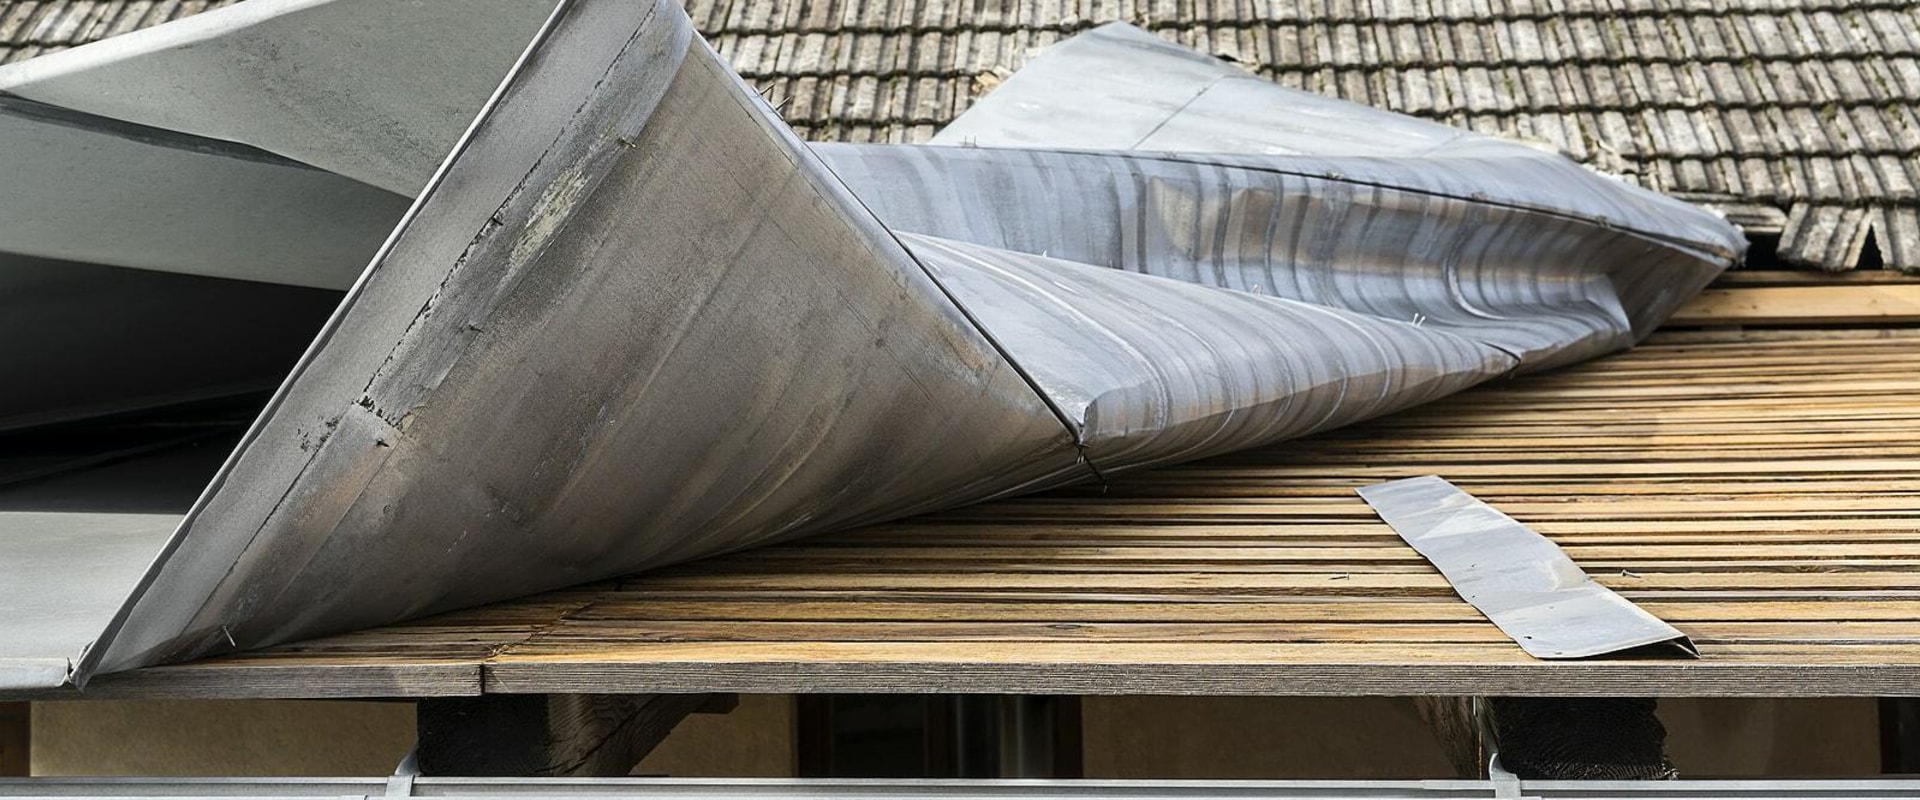 What are the disadvantages of a metal roof?